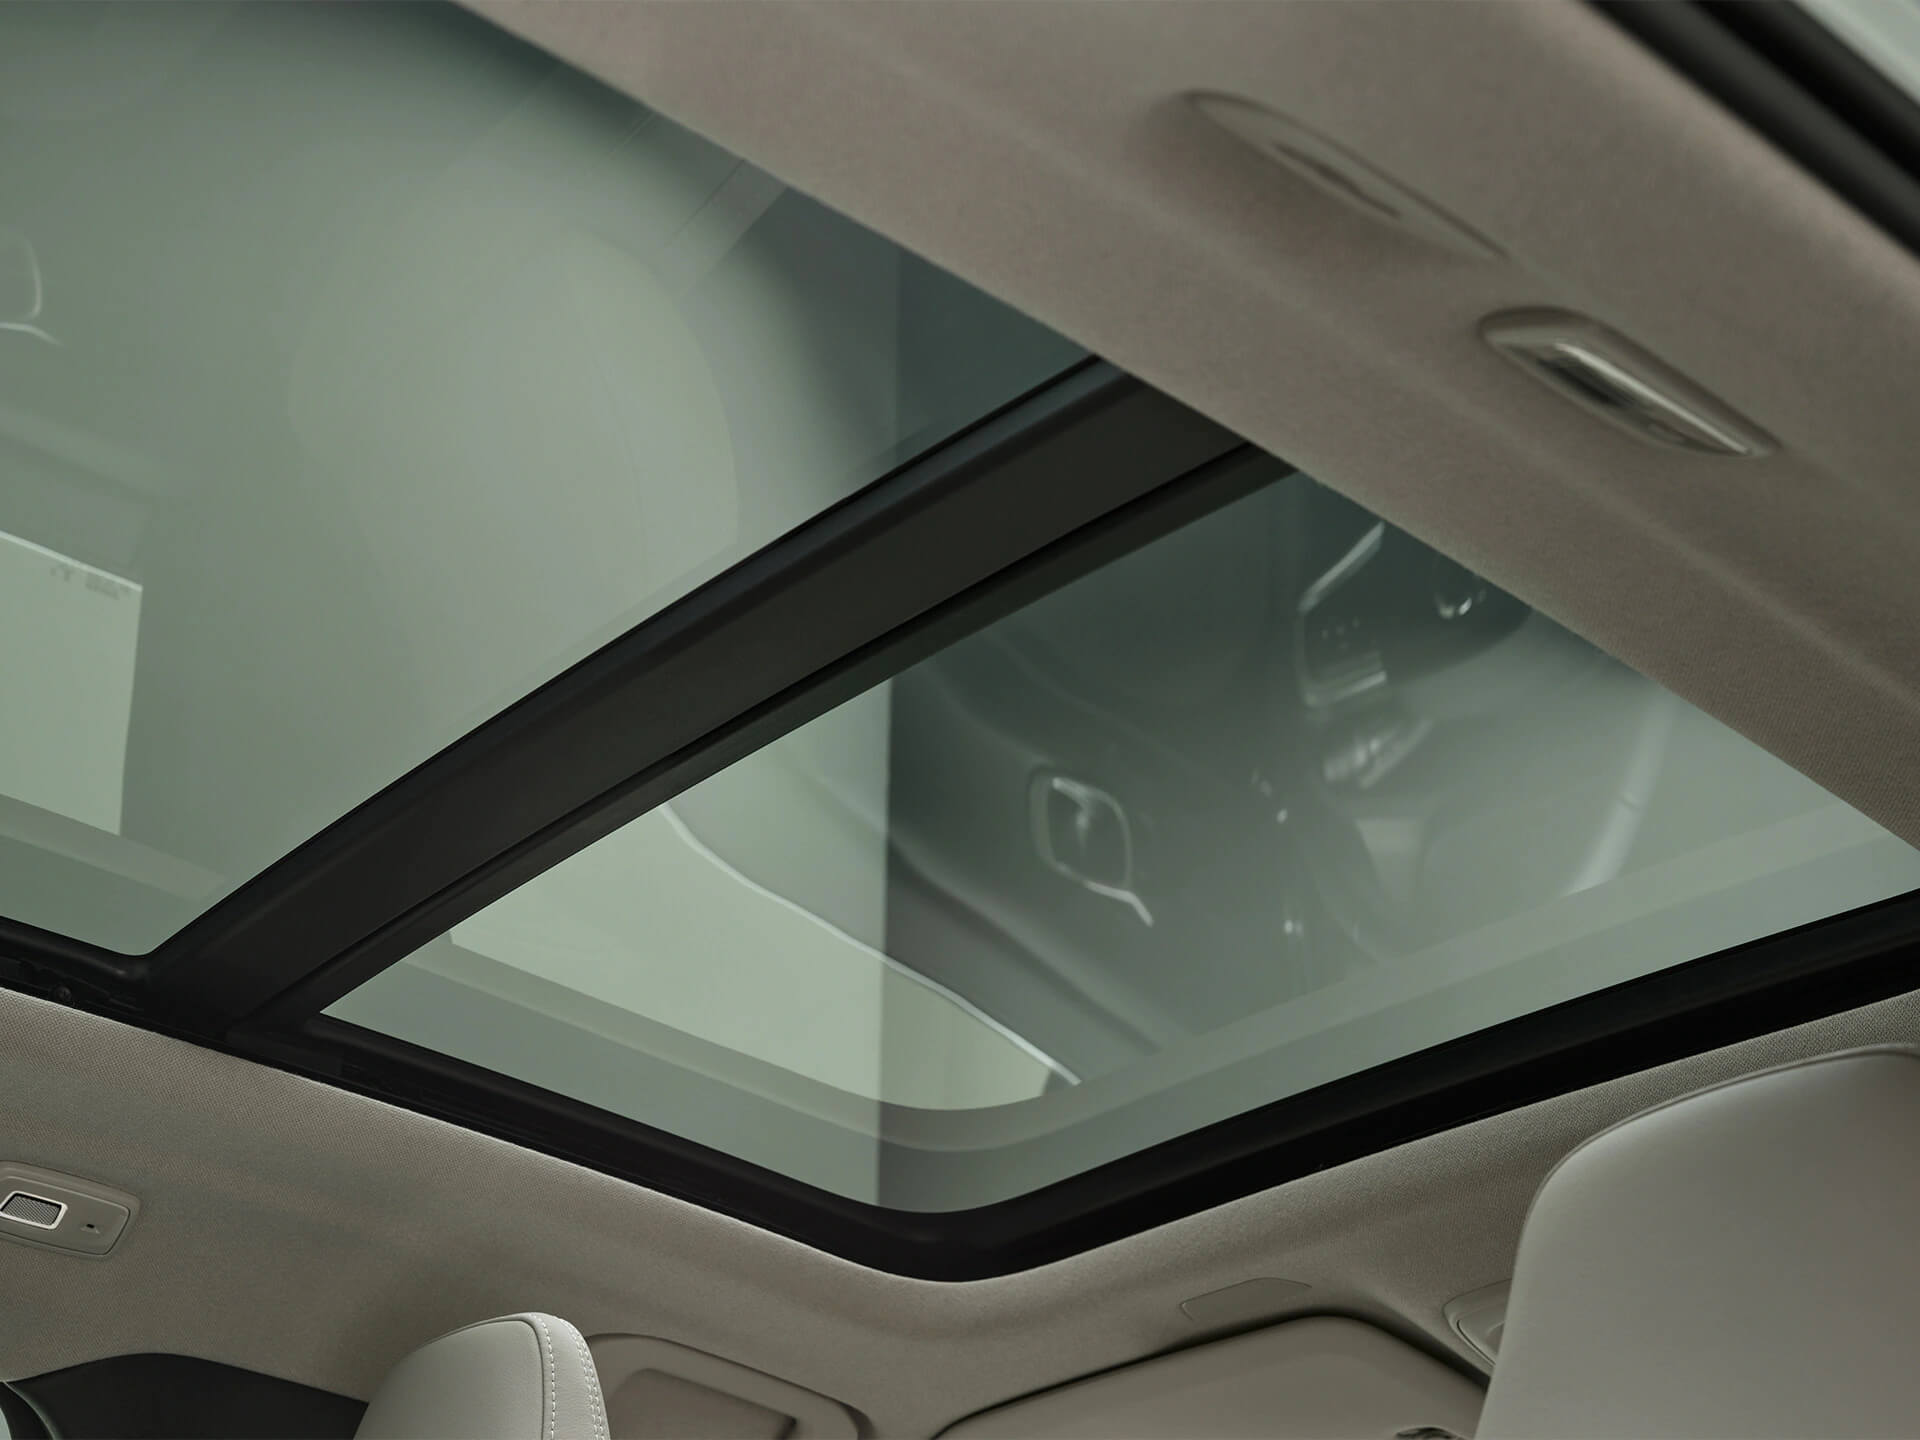 Panoramic roof lets light flood in Image